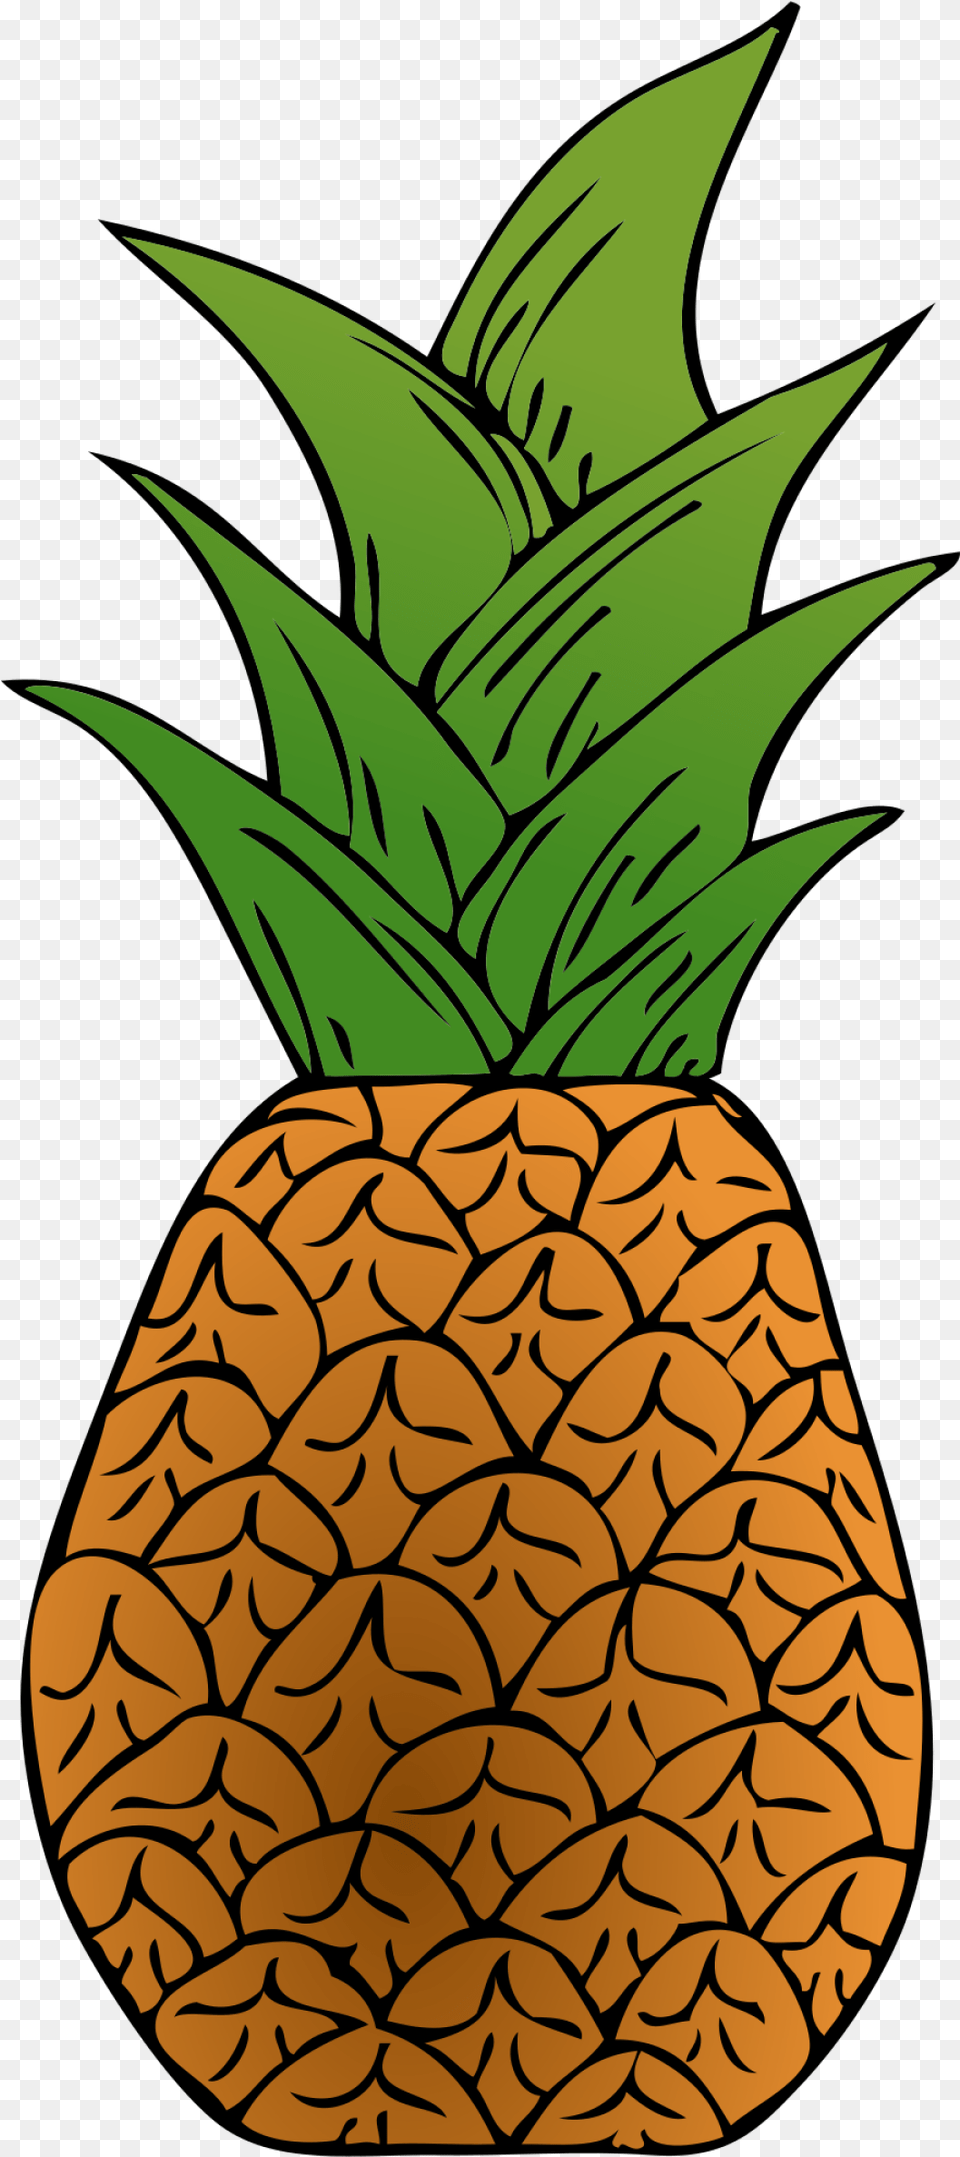 Pineapple Clip Arts For Web Clip Arts Backgrounds Pineapple Top Cartoon, Food, Fruit, Plant, Produce Free Png Download